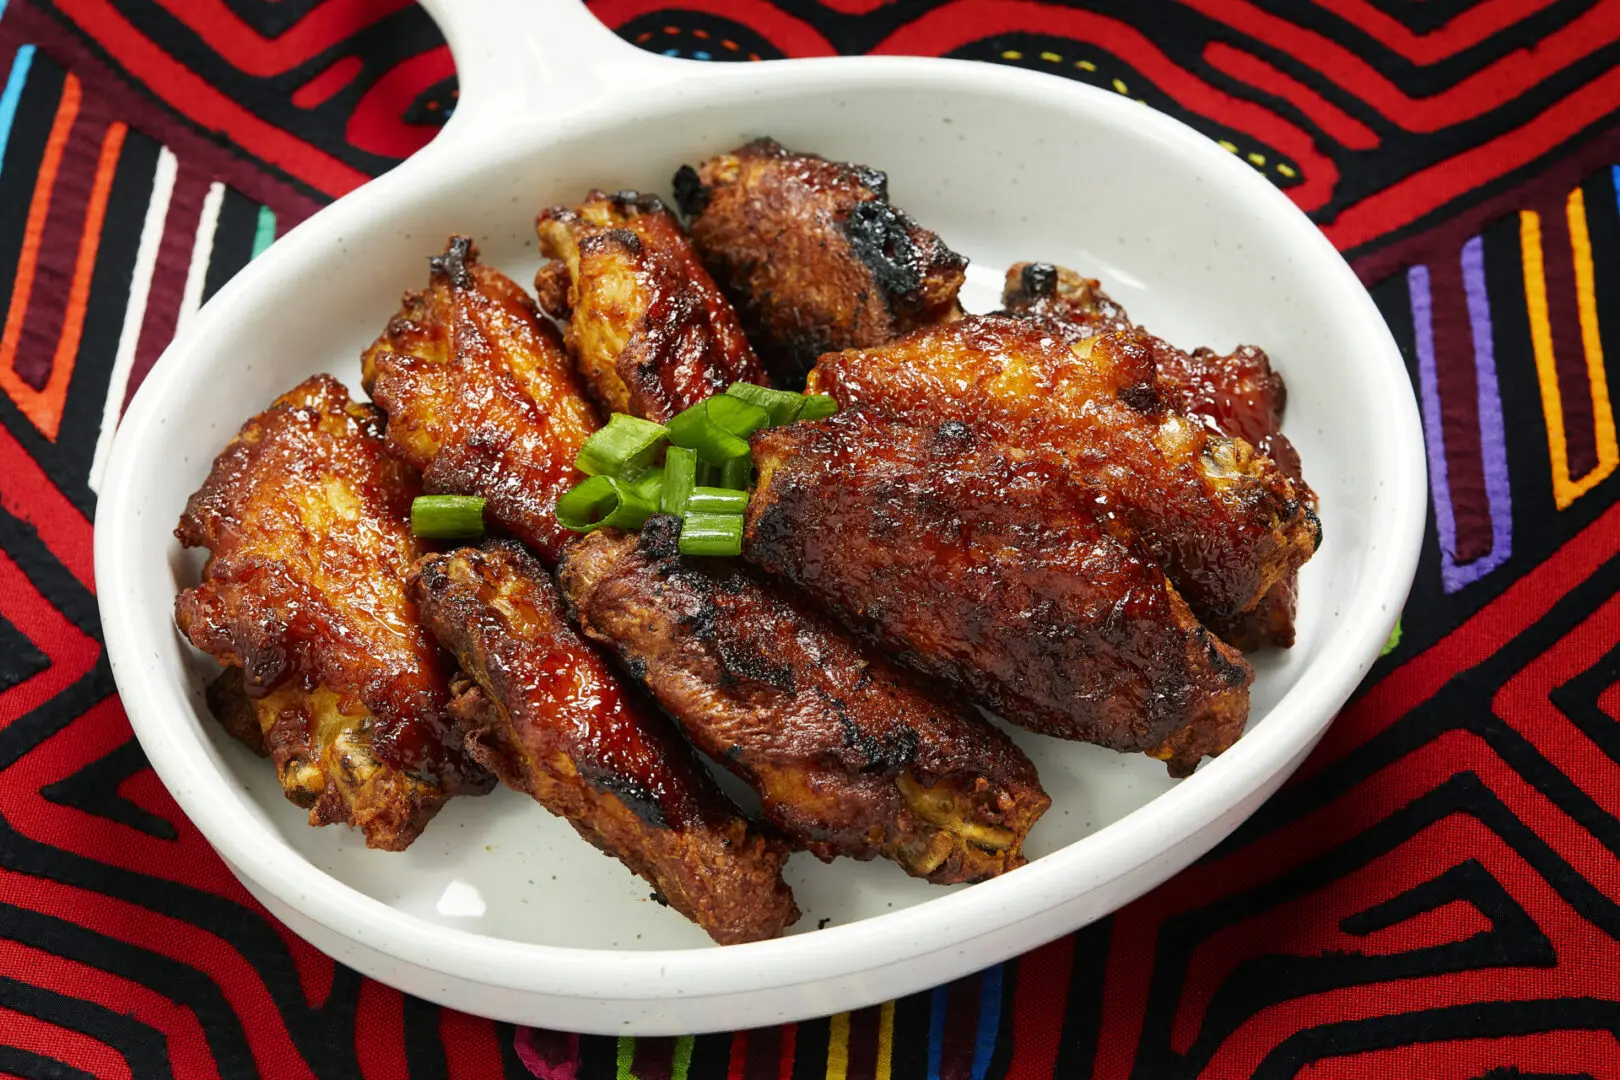 Crispy and spicy chicken wings served in a plate